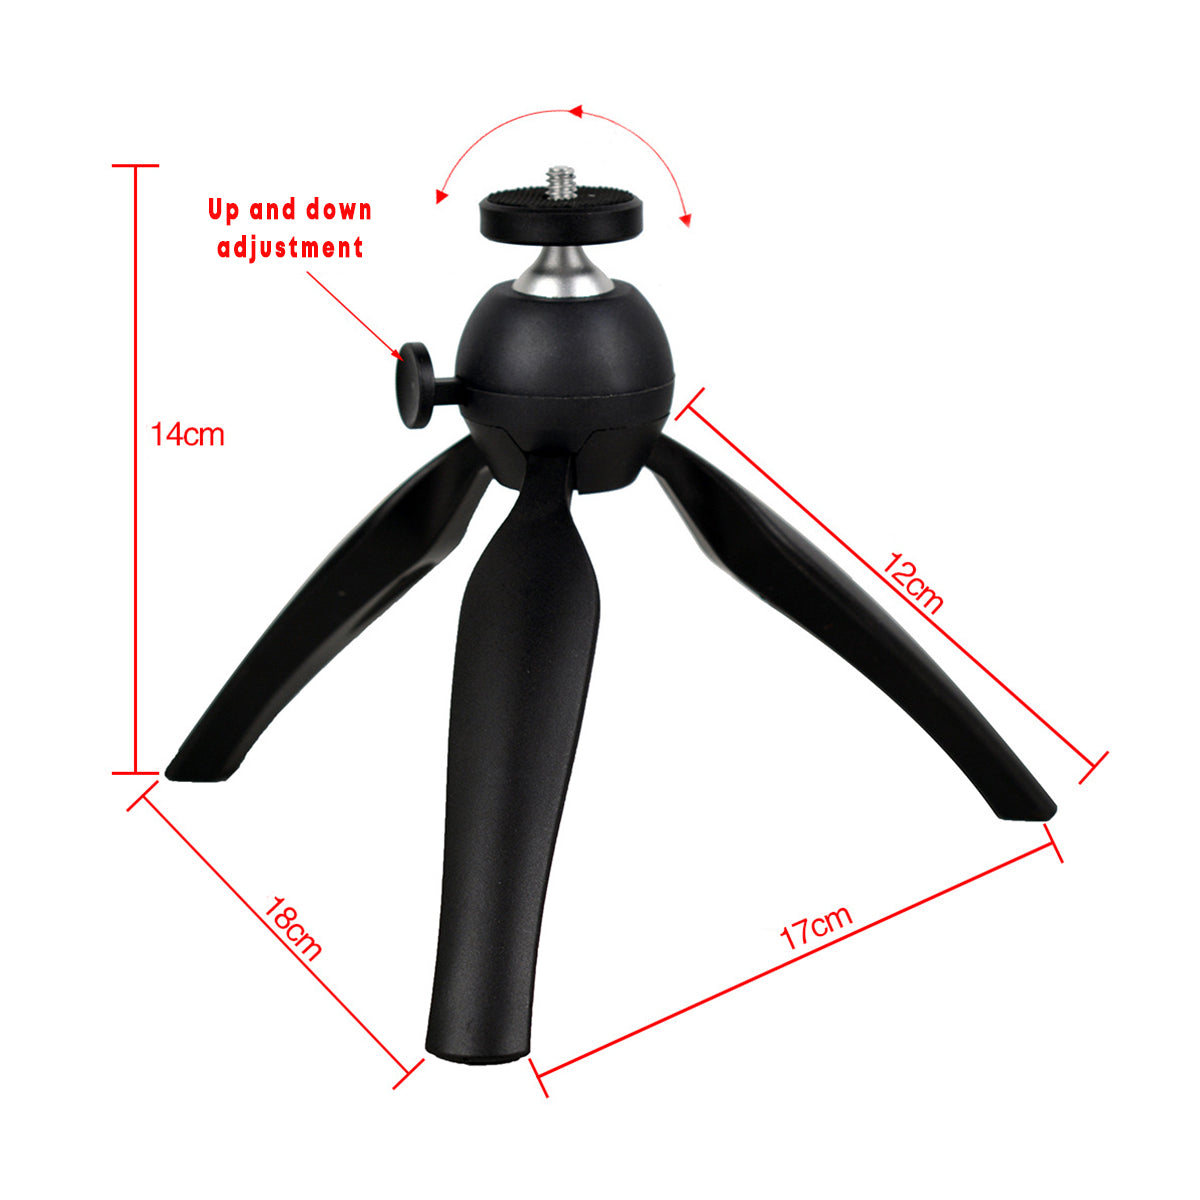 LED Makeup Ring Lamp and Phone Holder Tripod